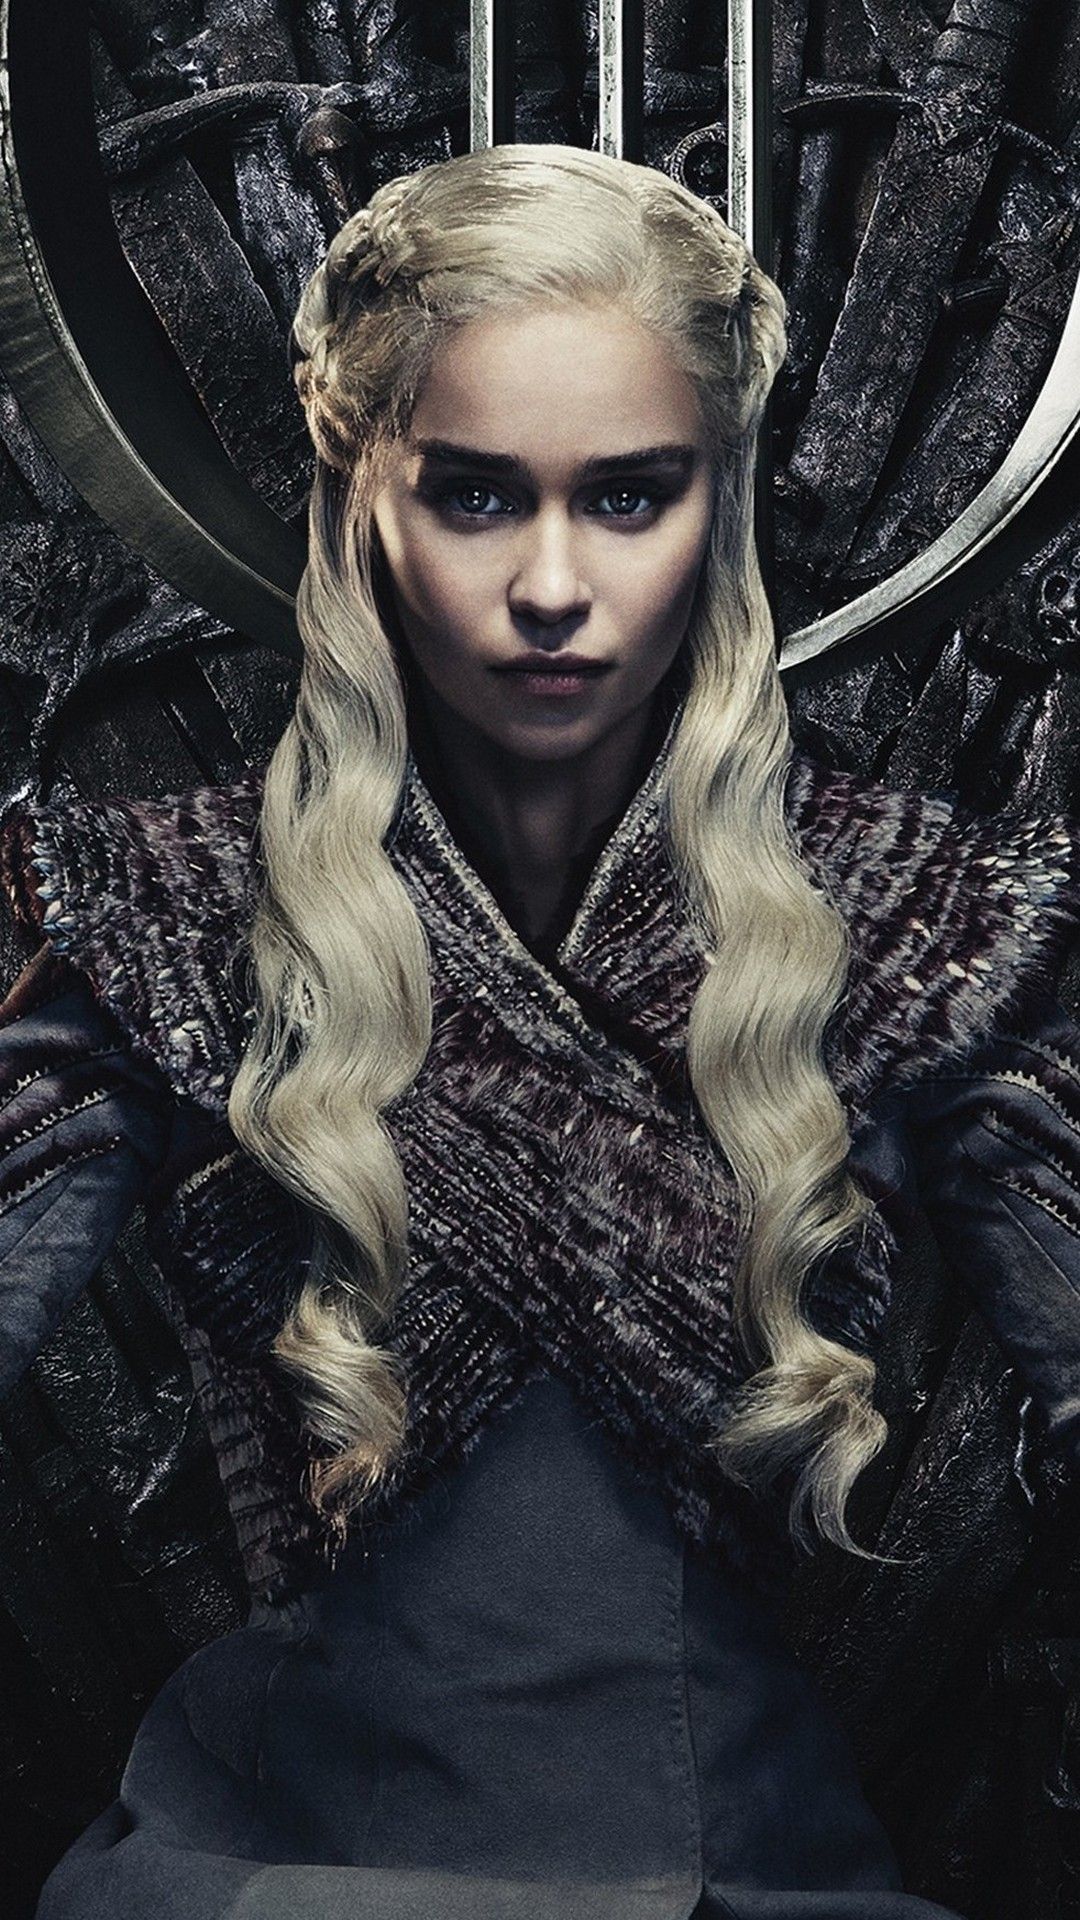 Game of Thrones 8 Season Wallpaper For iPhone iPhone Wallpaper. Game of thrones artwork, iPhone wallpaper, Mother of dragons